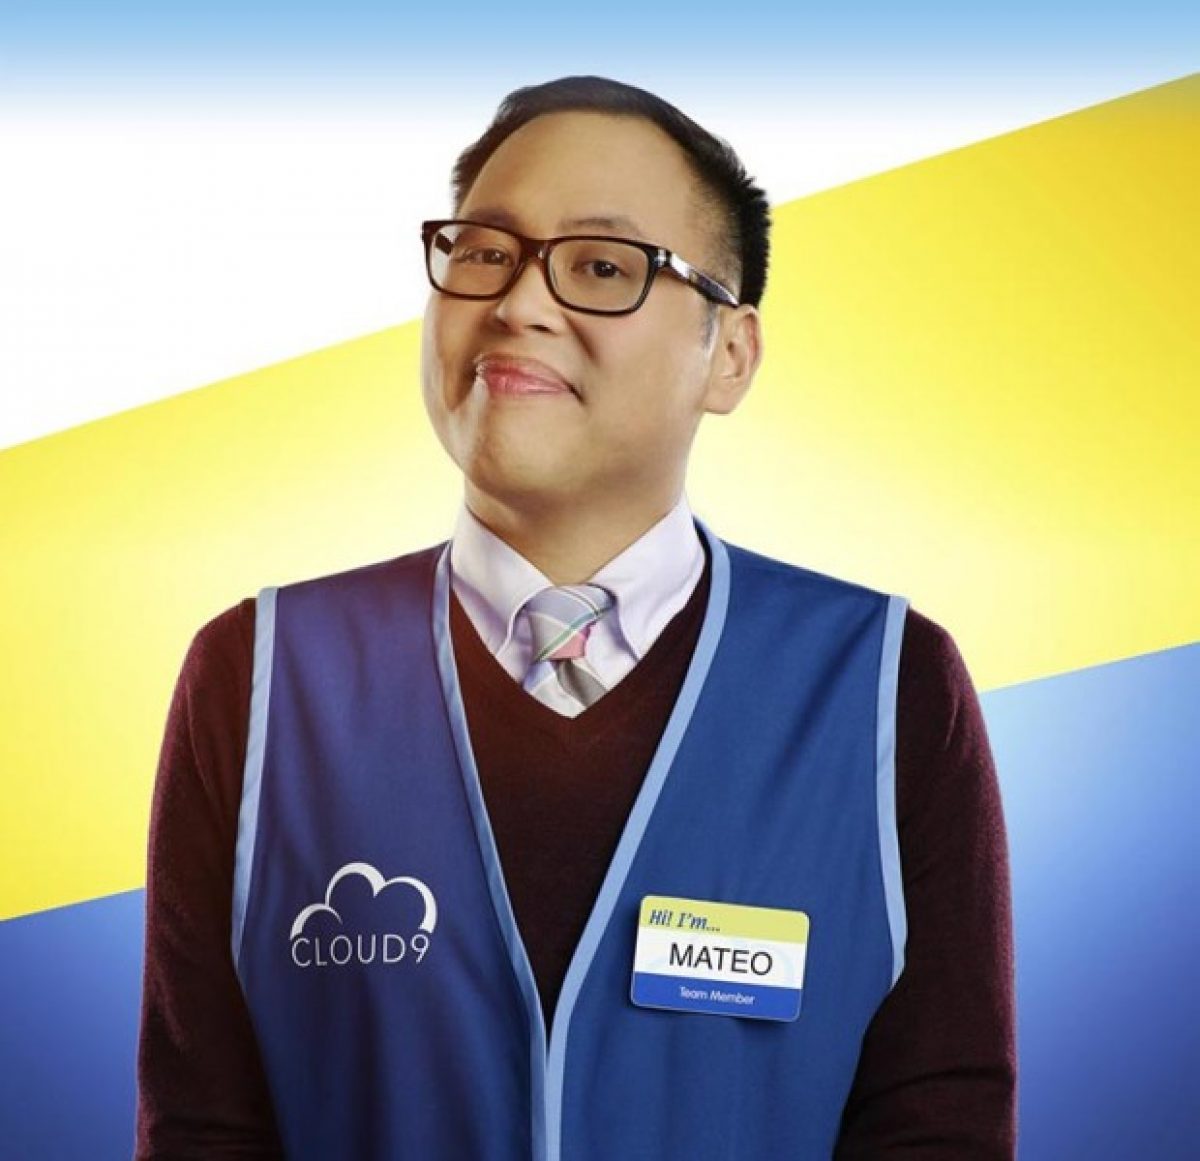 Superstore' star praises show for undocumented immigrant story